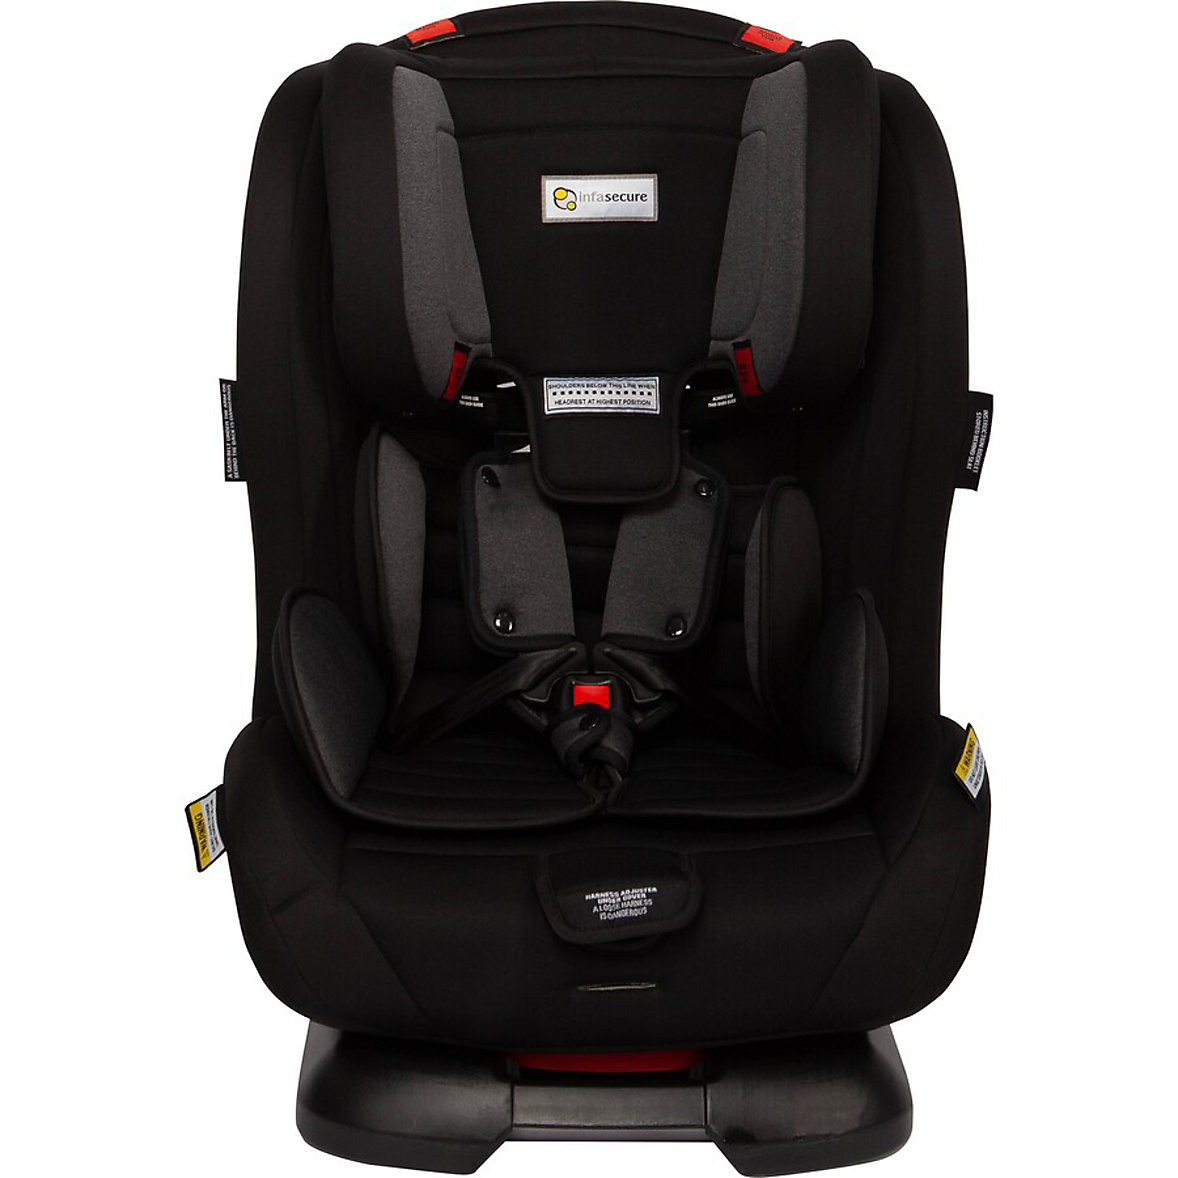 InfaSecure Advance Move Convertible Car Seat